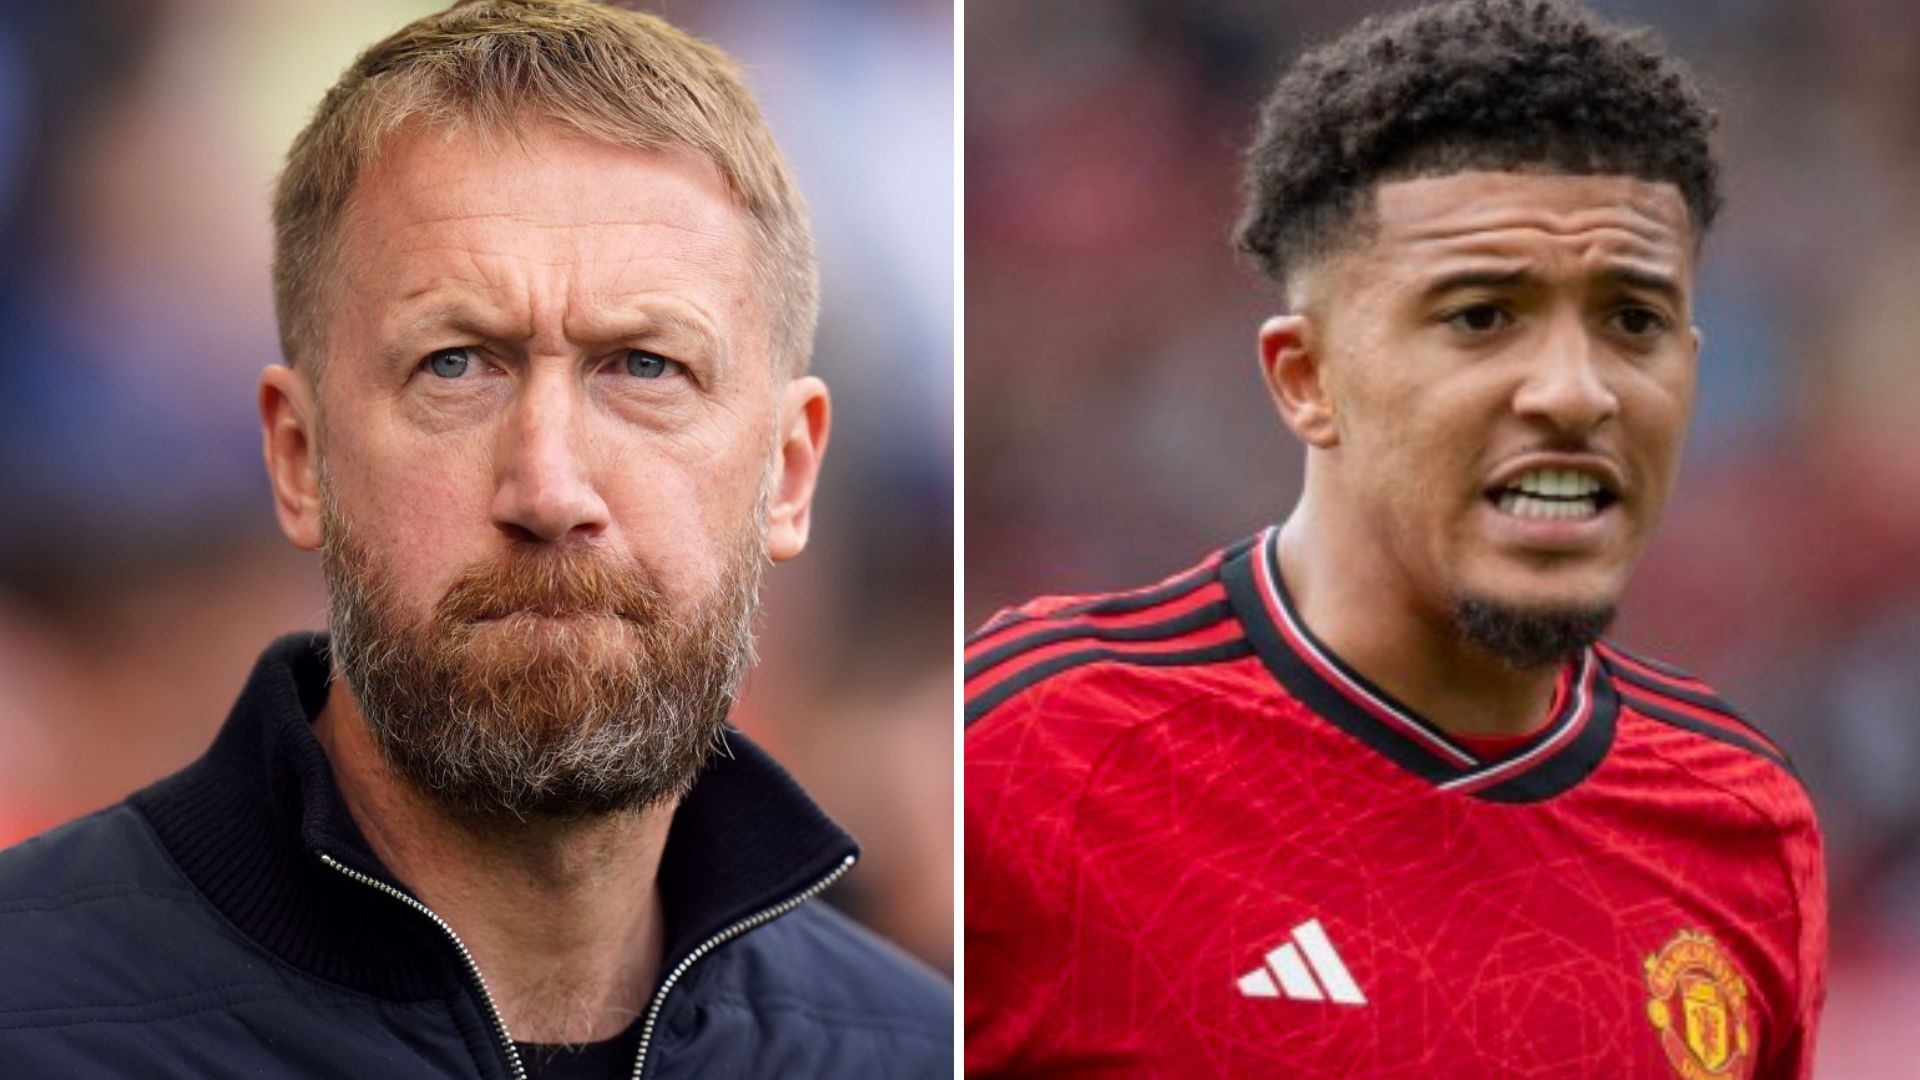 Man Utd takeover news LIVE: Ten Hag’s renewed confidence EXCLUSIVE, PSG ‘want’ Casemiro, Ratcliffe announcement latest